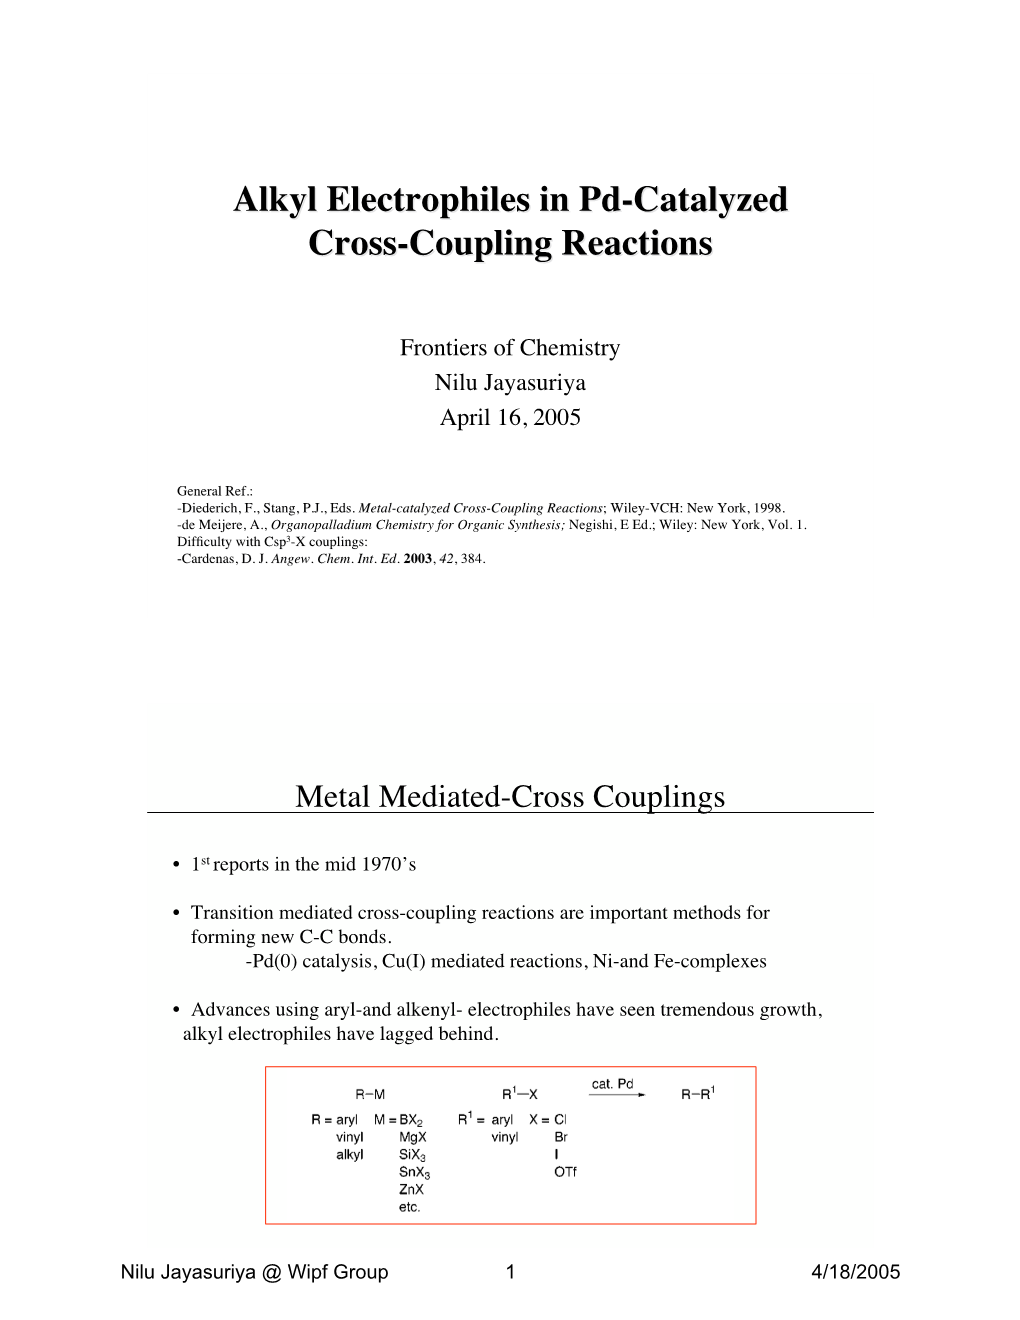 Alkyl Electrophiles in Pd-Catalyzed Cross-Coupling Reactions